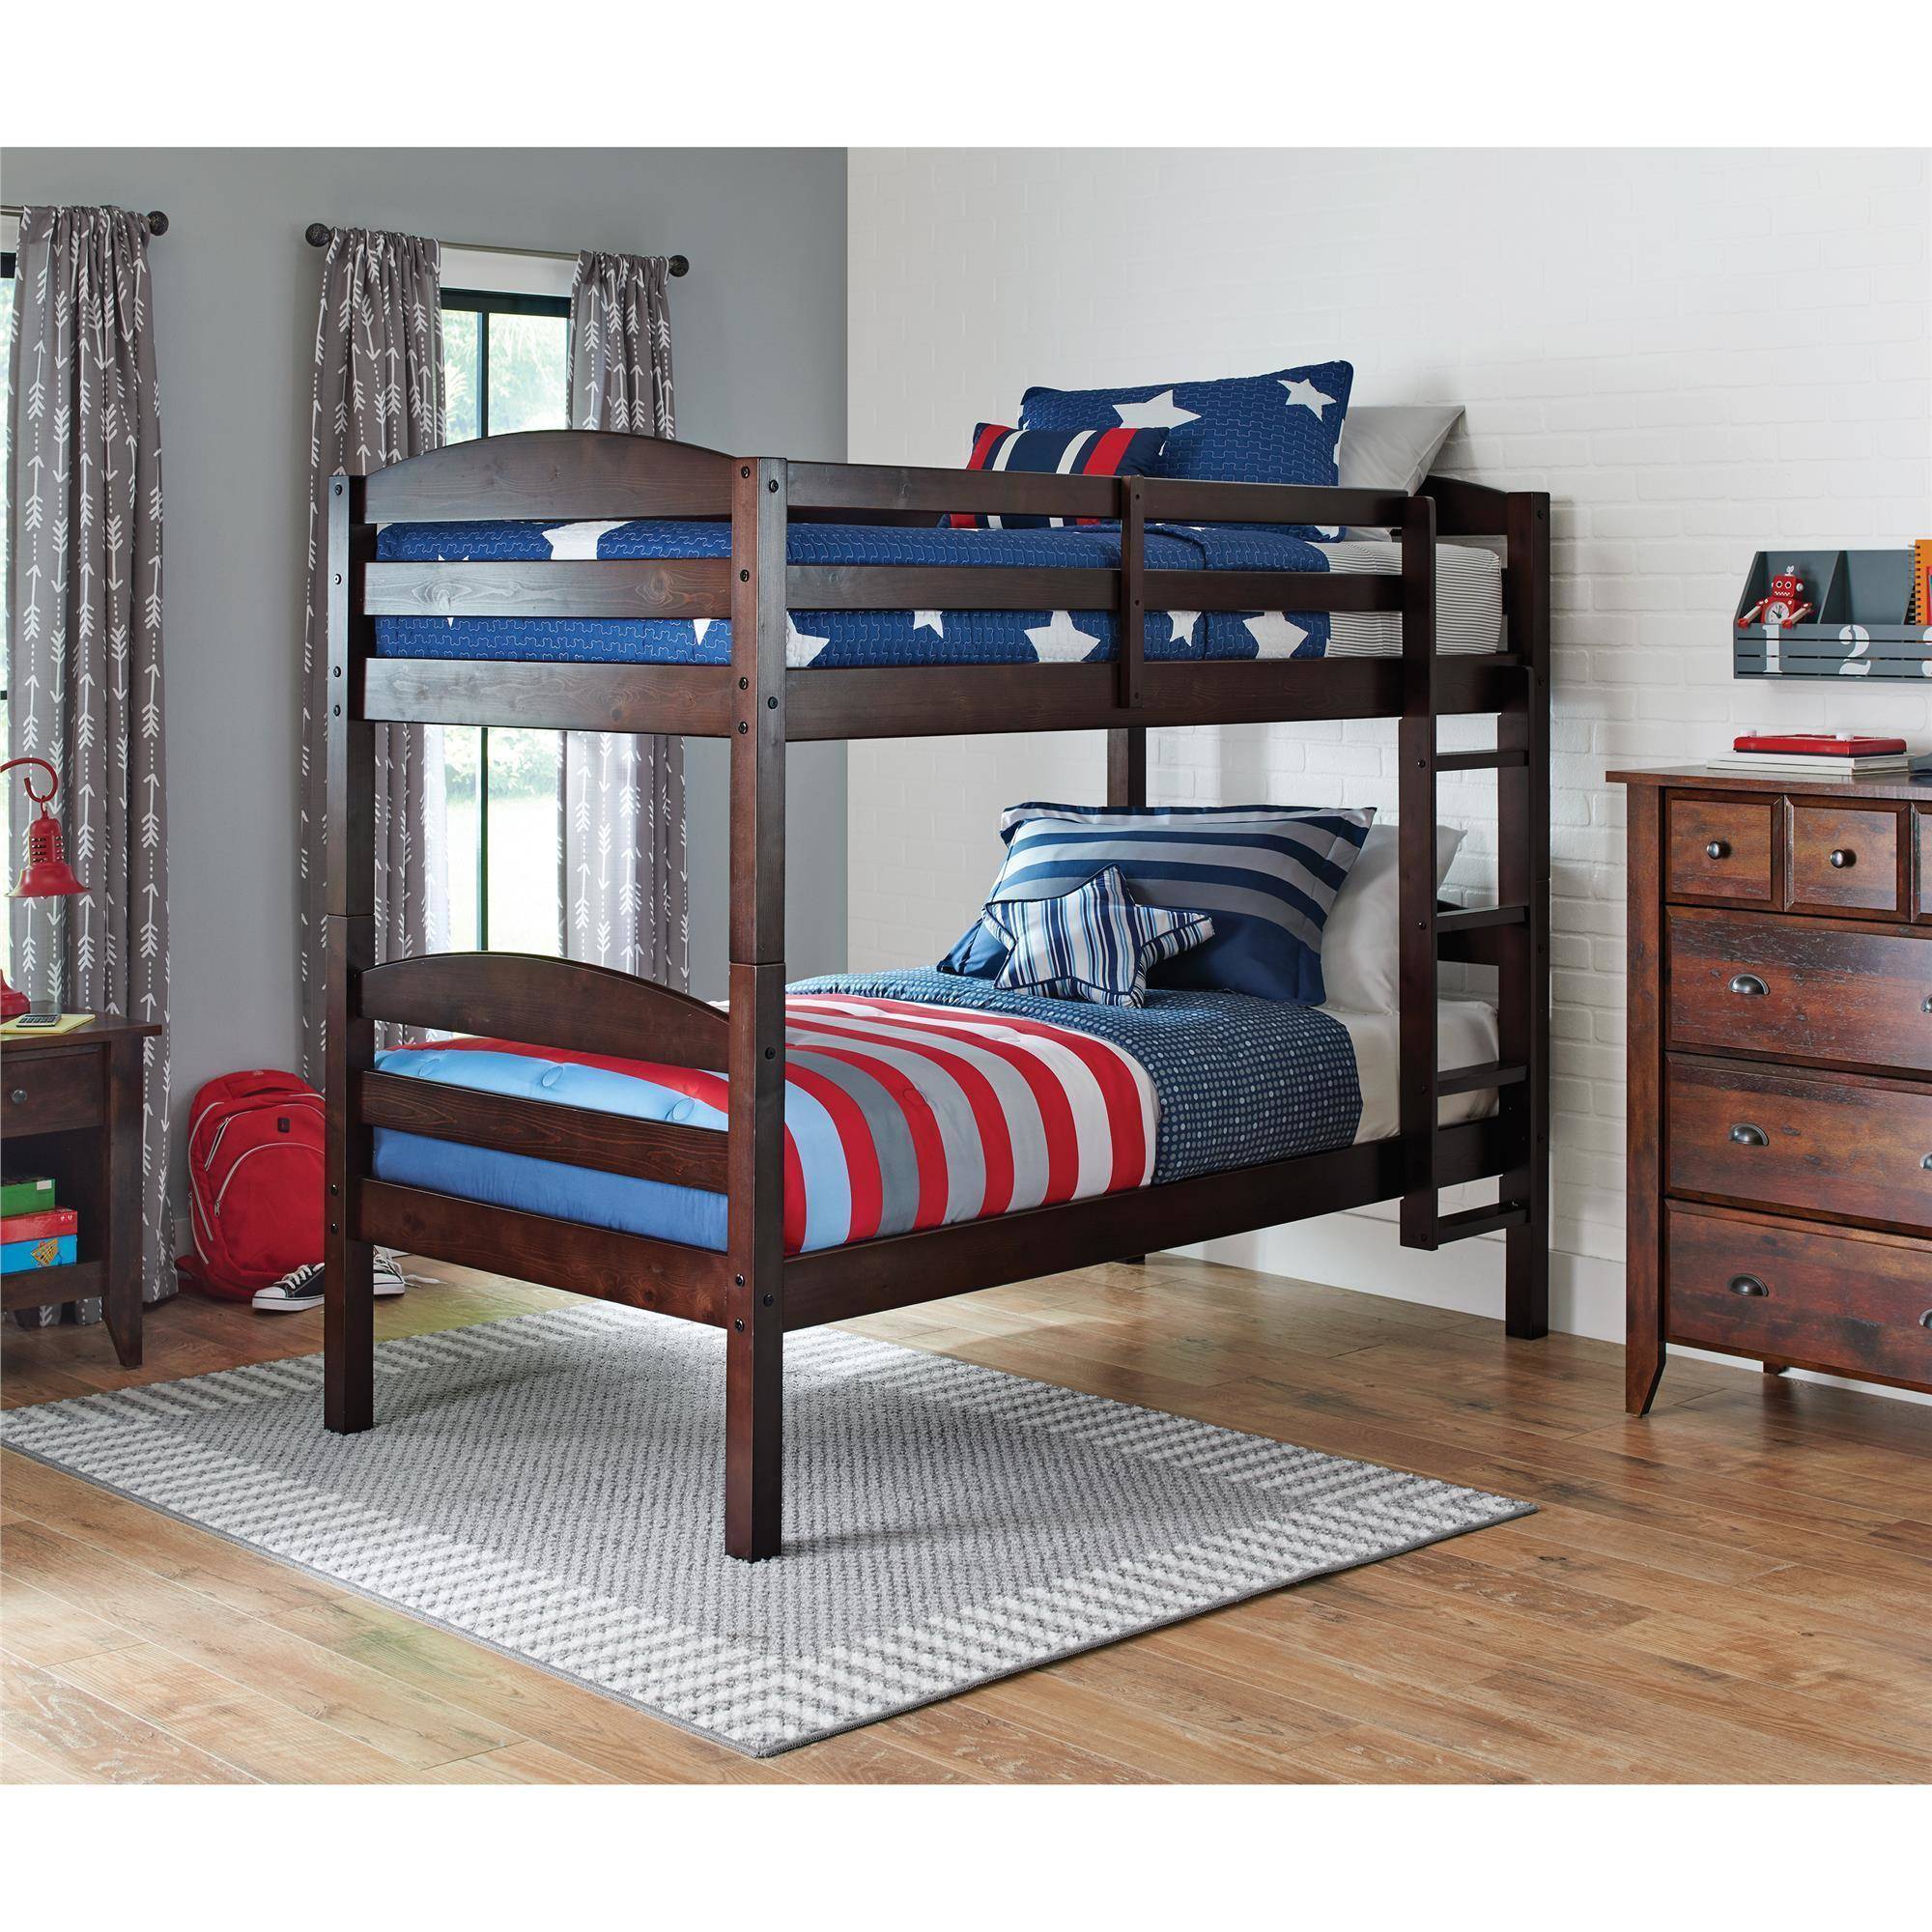 Better Homes And Gardens Leighton Twin Wood Bunk Beds